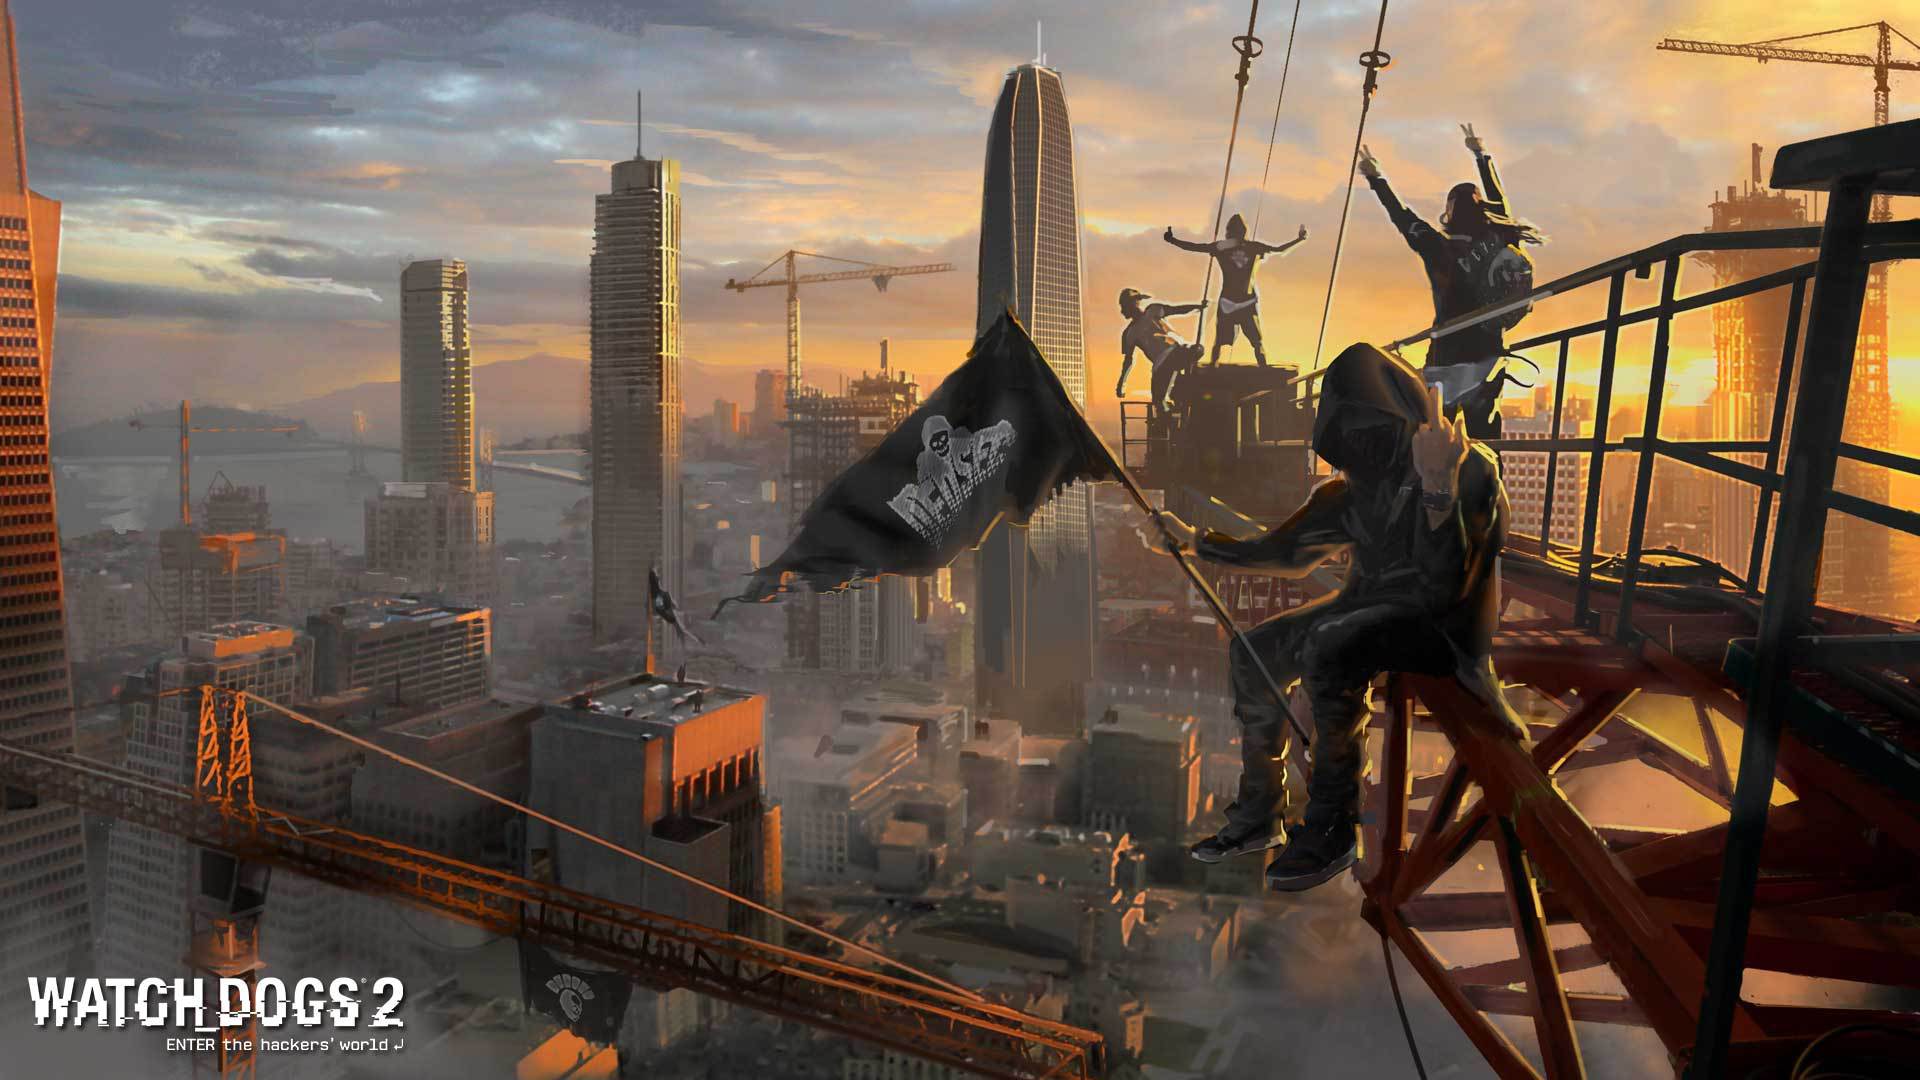 Watch Dogs 2 Wallpaper High Quality